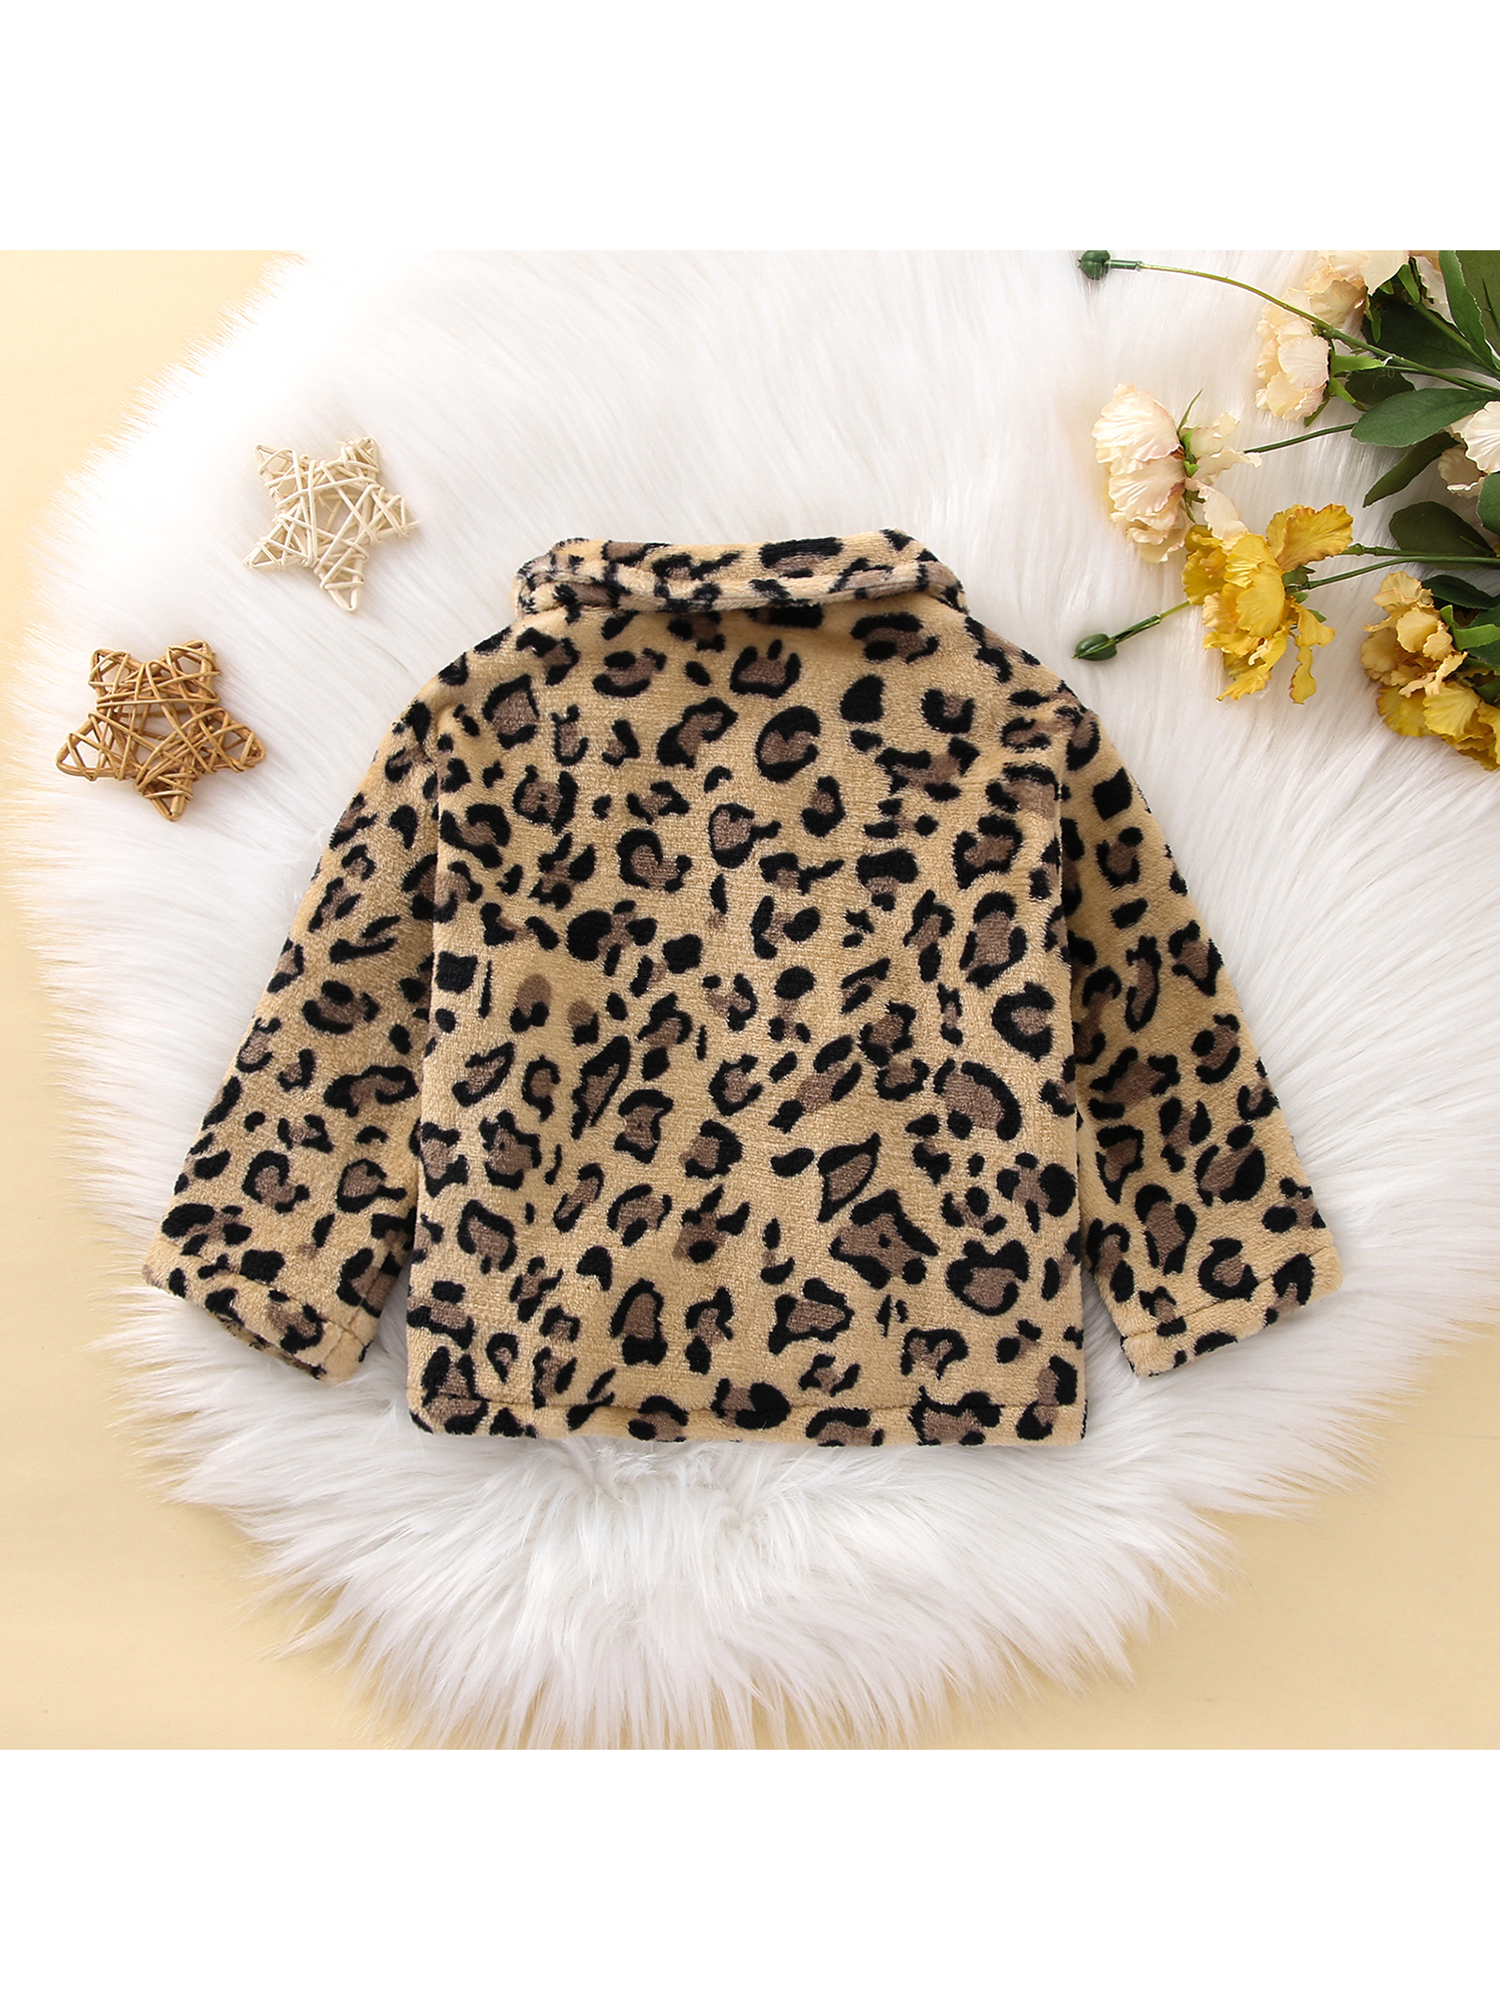 Musuos Toddler Baby Winter Jacket, Fashion Long Sleeve Leopard Print Button Down Plush Coat - image 4 of 10